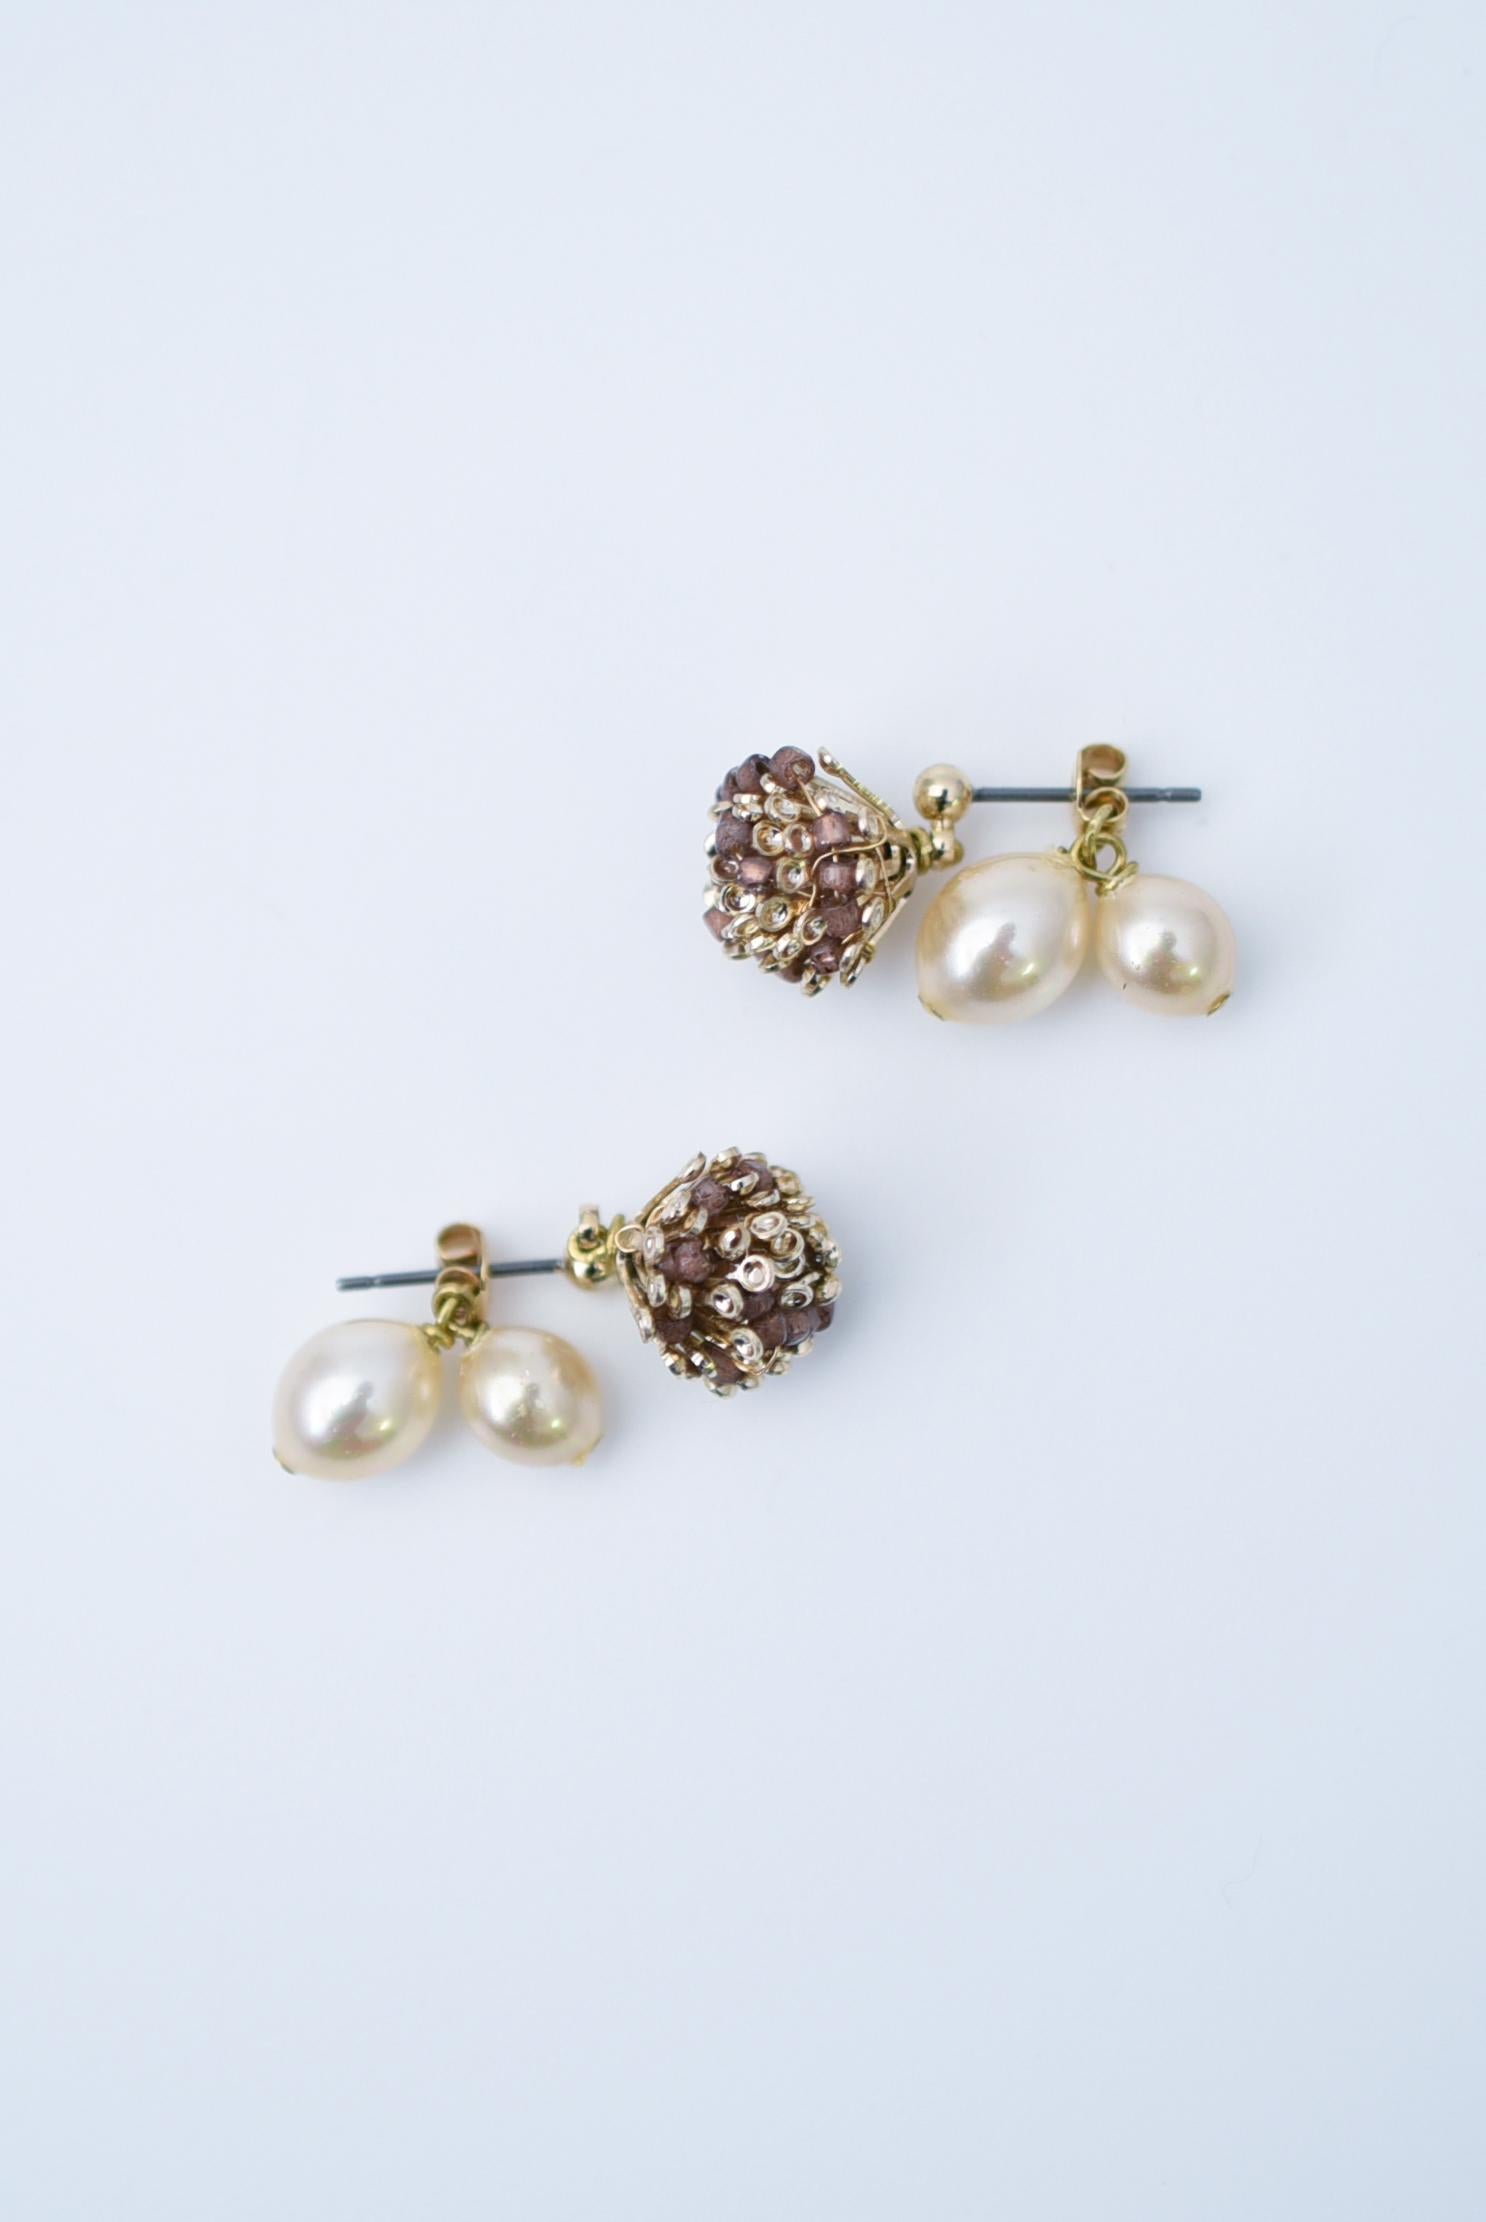 material:Brass, vintage 1960s Japanese glass pearls, glass beads
size:length 1.5cm


This series is based on the flower motif of Scabiosa.
The top motif is inspired by a bud.
The plump pearls are vintage pearls made in Japan in the 1980s.

The